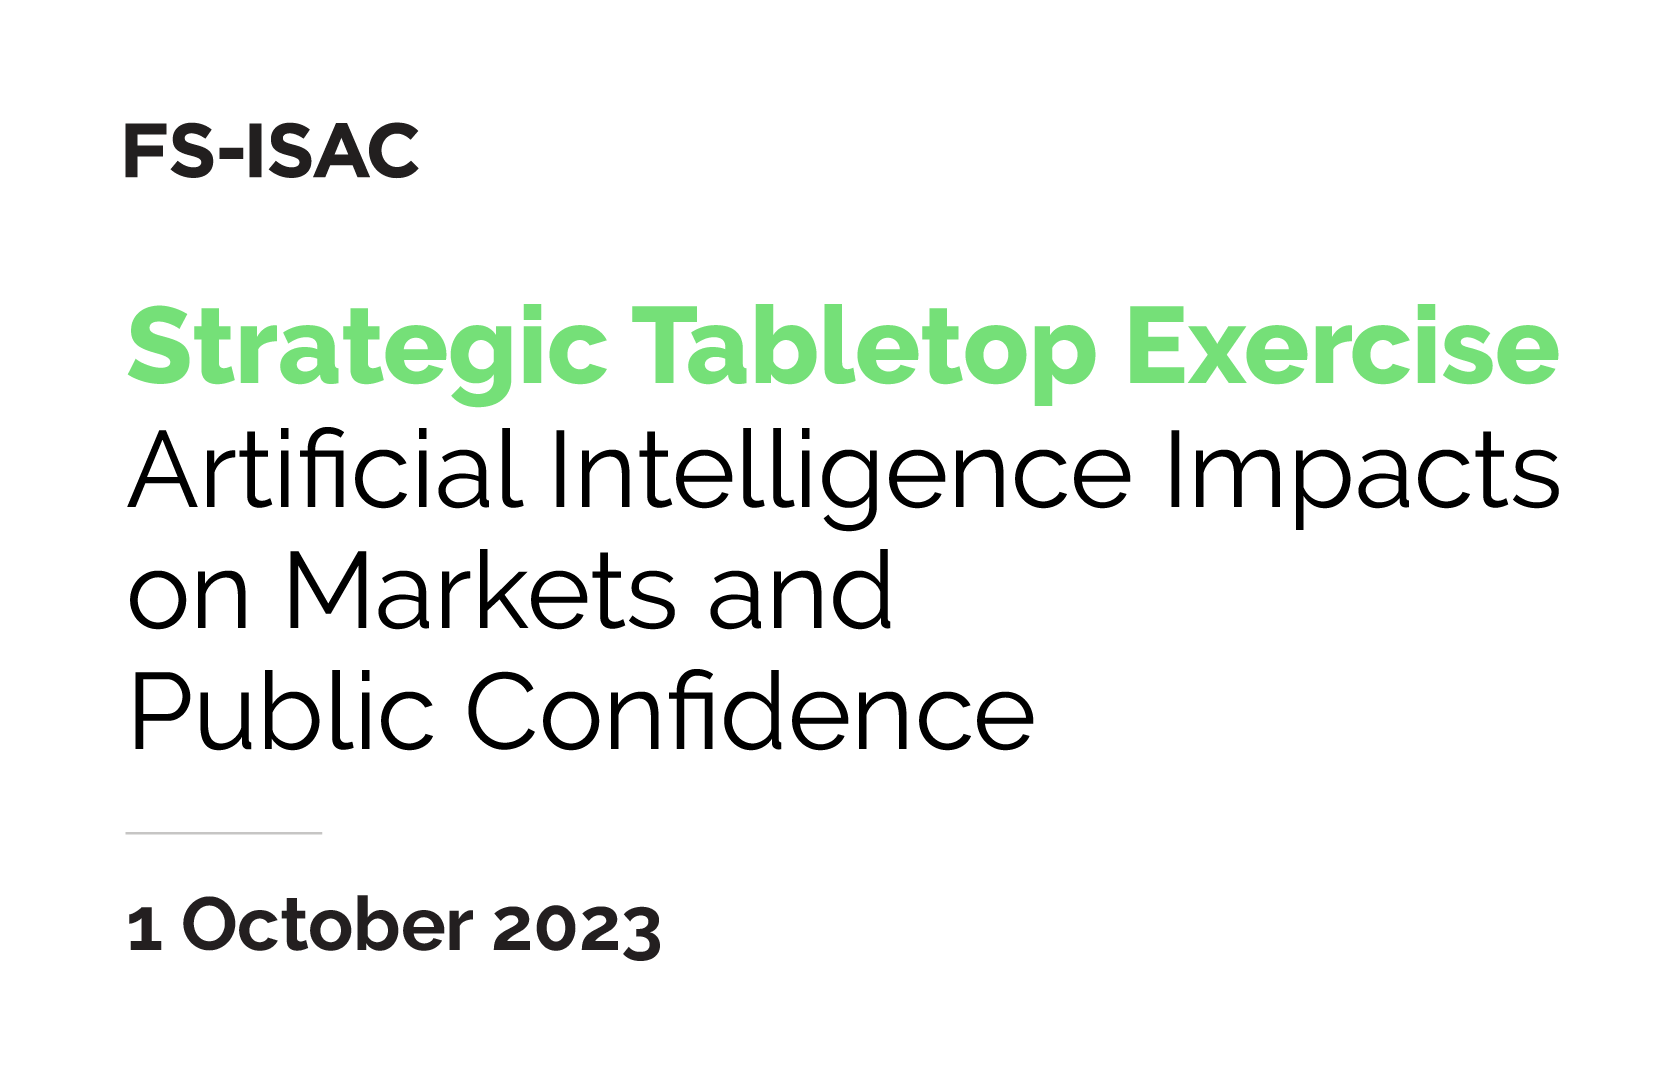 FS-ISAC Strategic Tabletop Exercise | Artificial Intelligence Impacts on Markets and Public Confidence